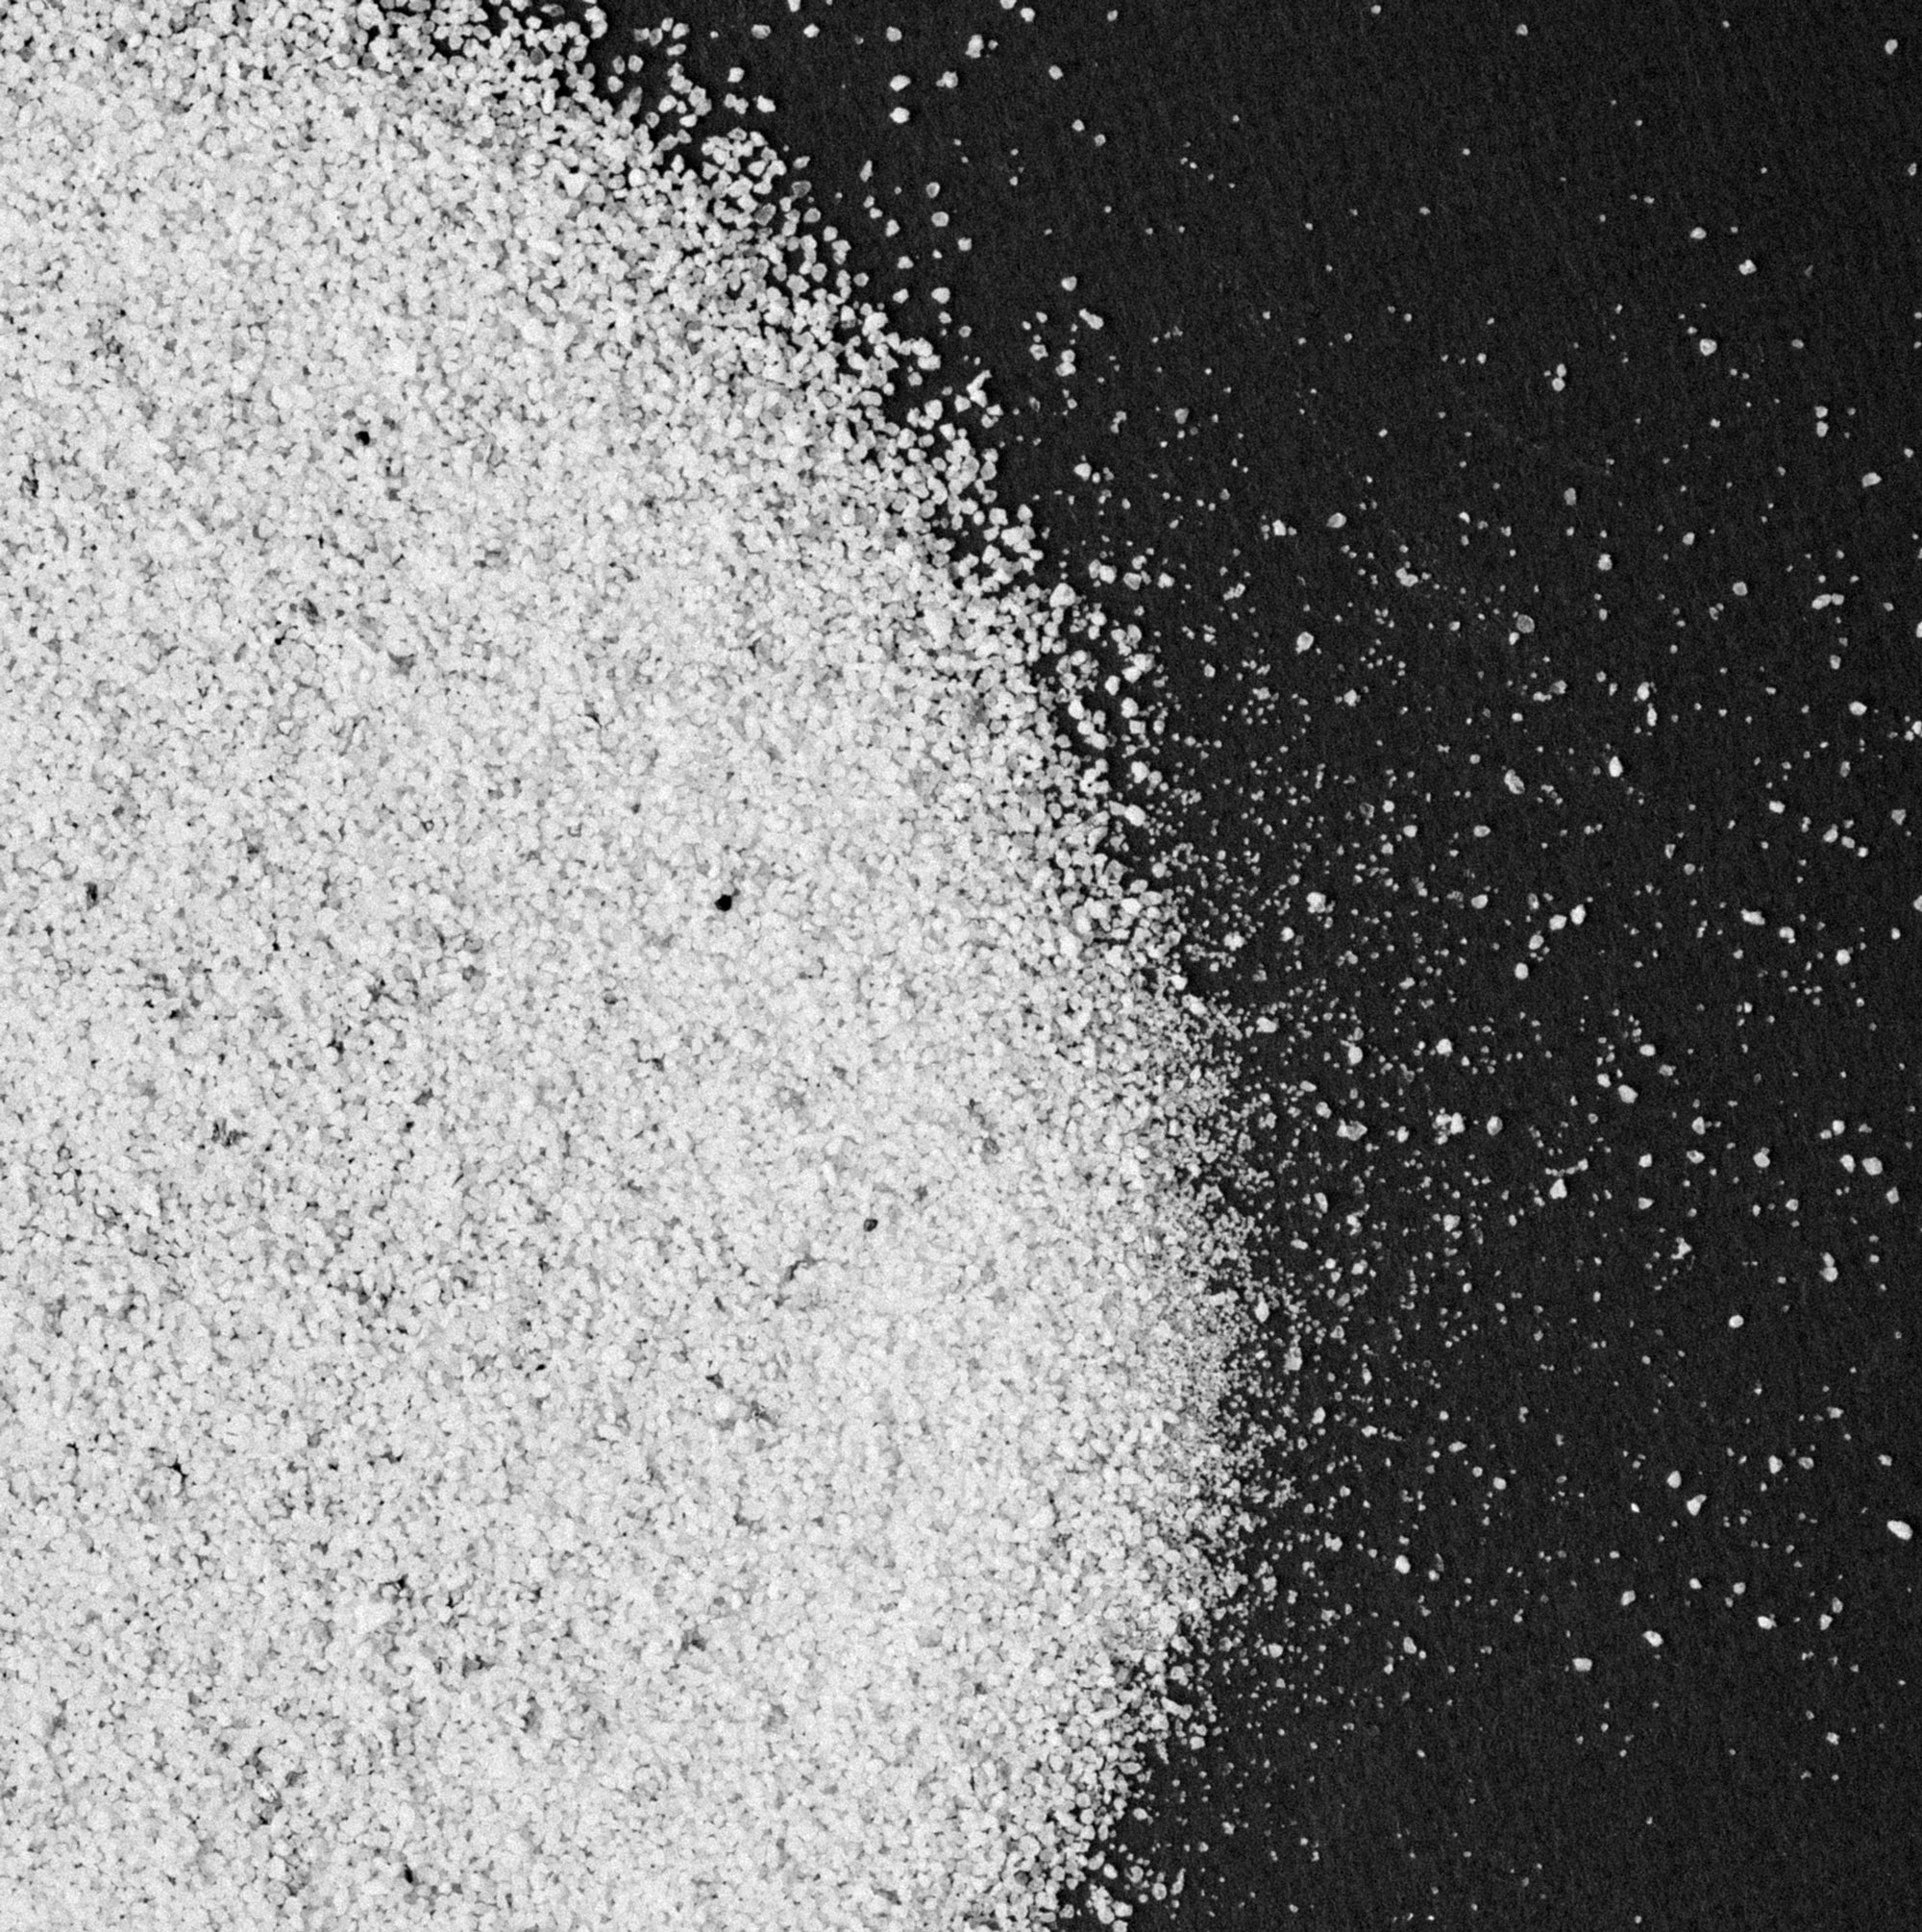 A close-up of white granules, resembling sugar or salt, scattered on a black surface. The granules are densely packed on the left side of the image and gradually disperse towards the right.